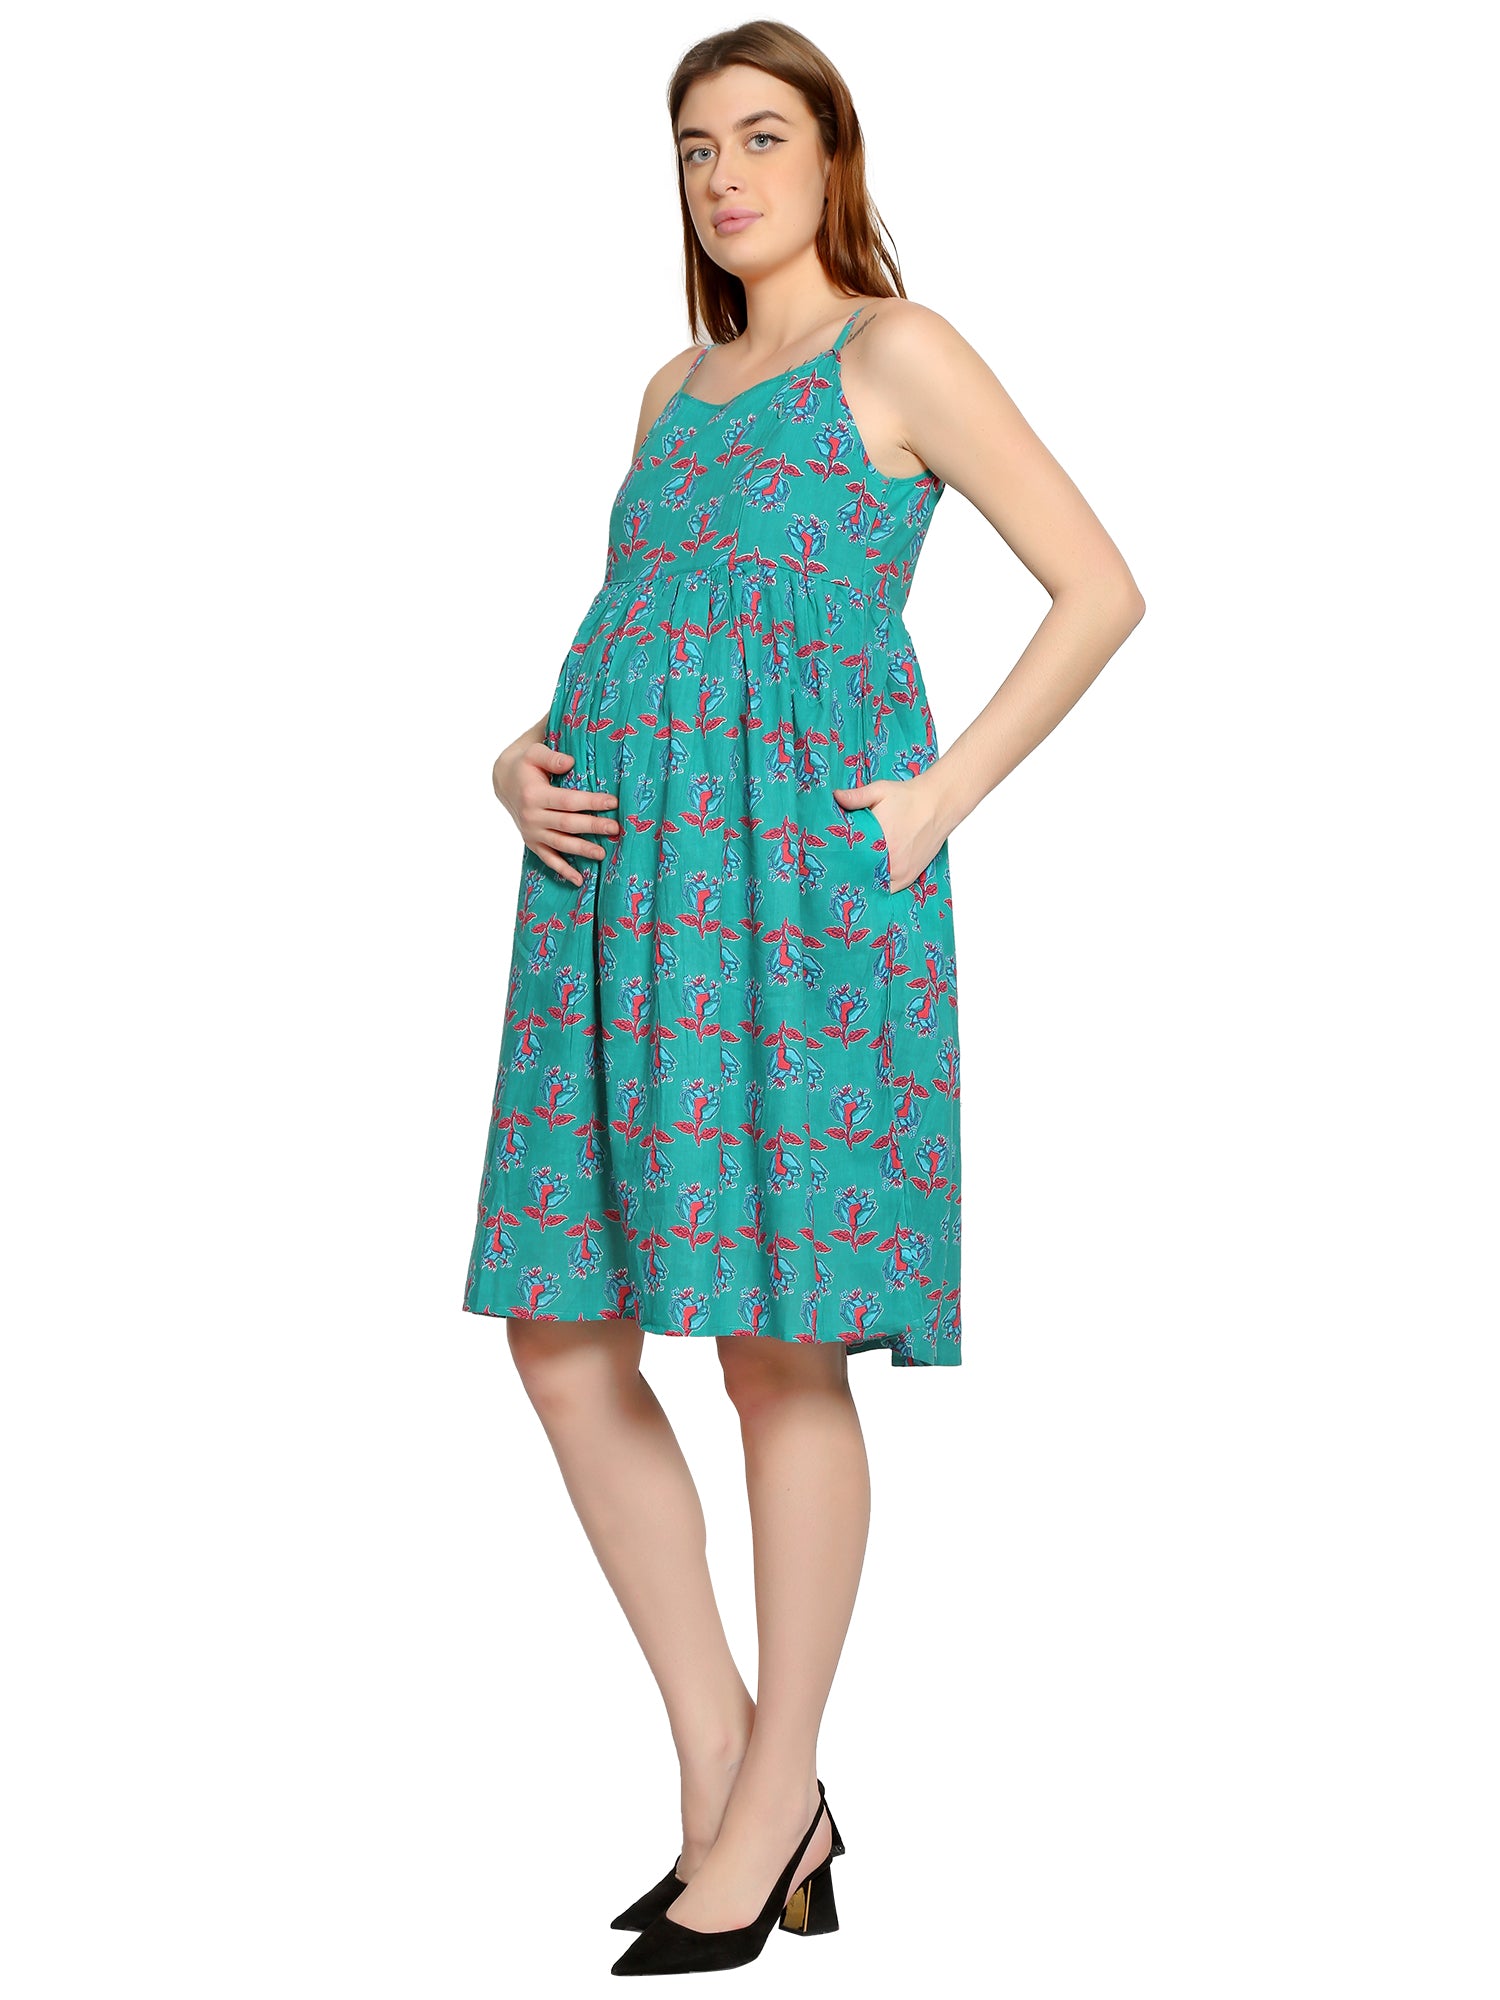 Teal Summer Cotton Maternity and Feeding Dress